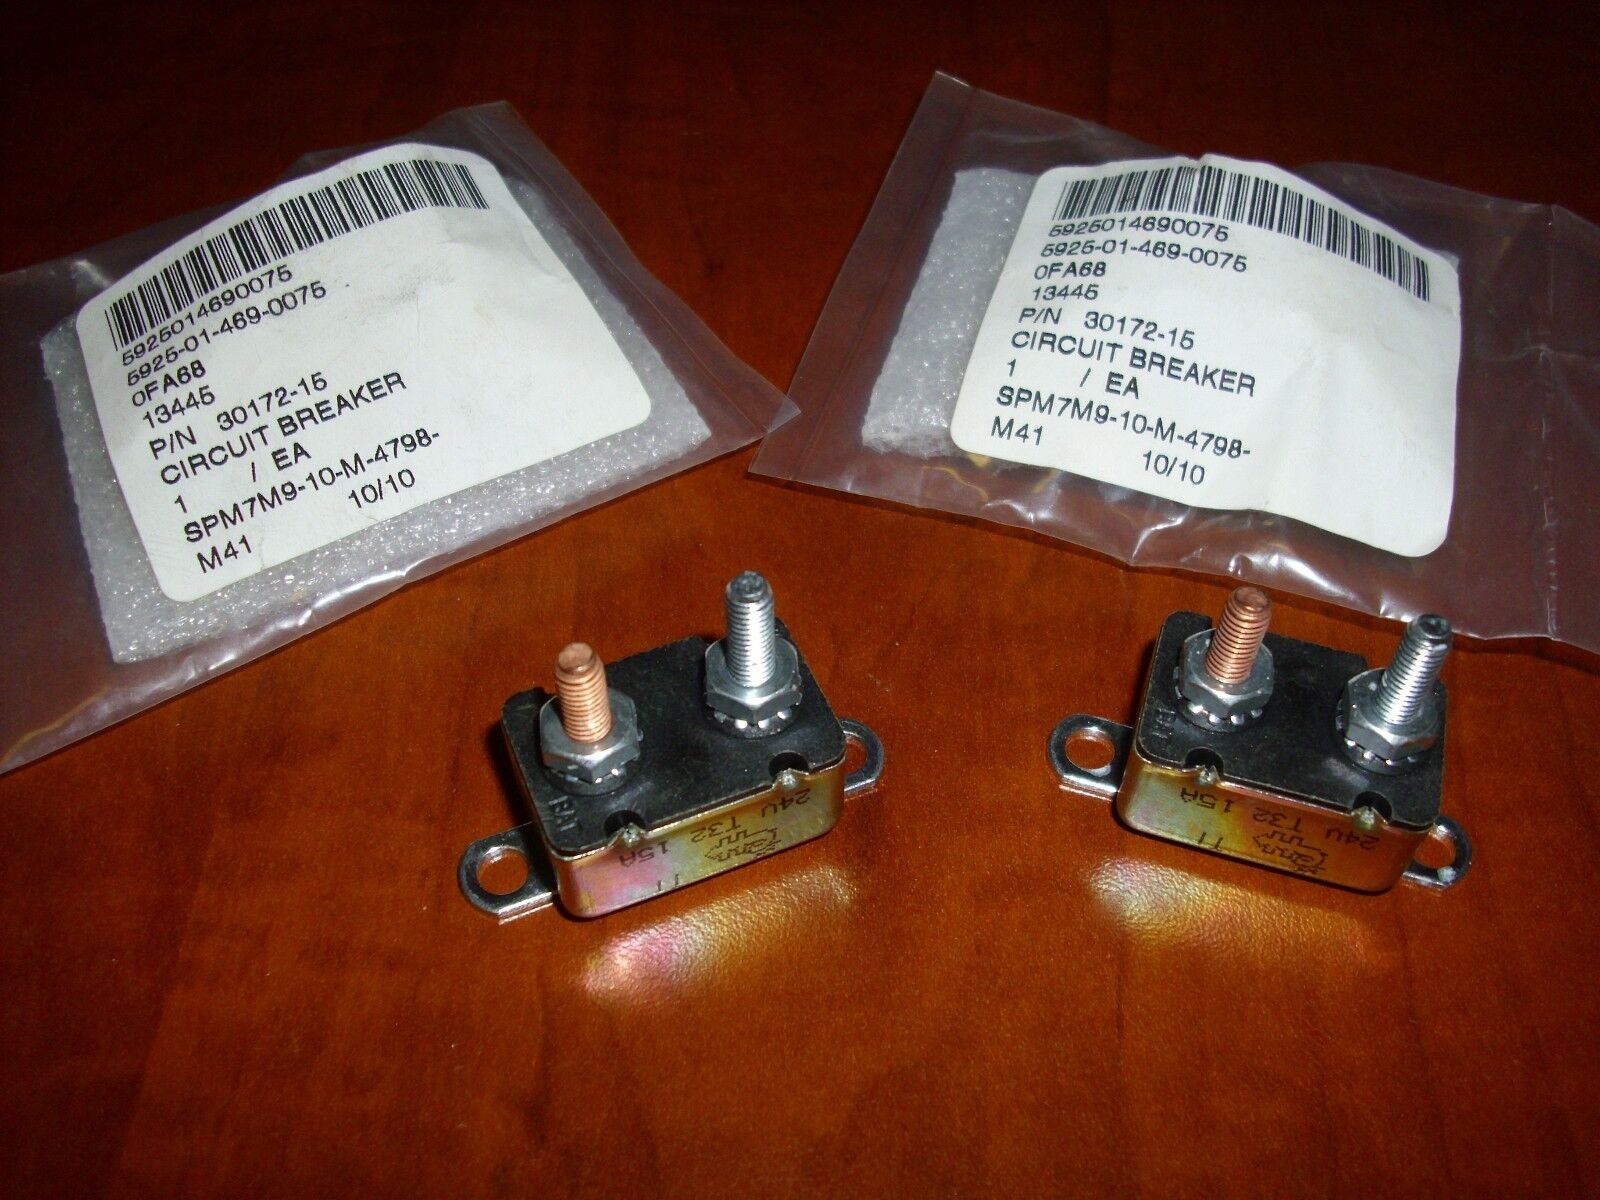 2 Cole Hersee 30172-15 Fuse and Circuits with Bracket 15A 24V 5925-01-469-0075